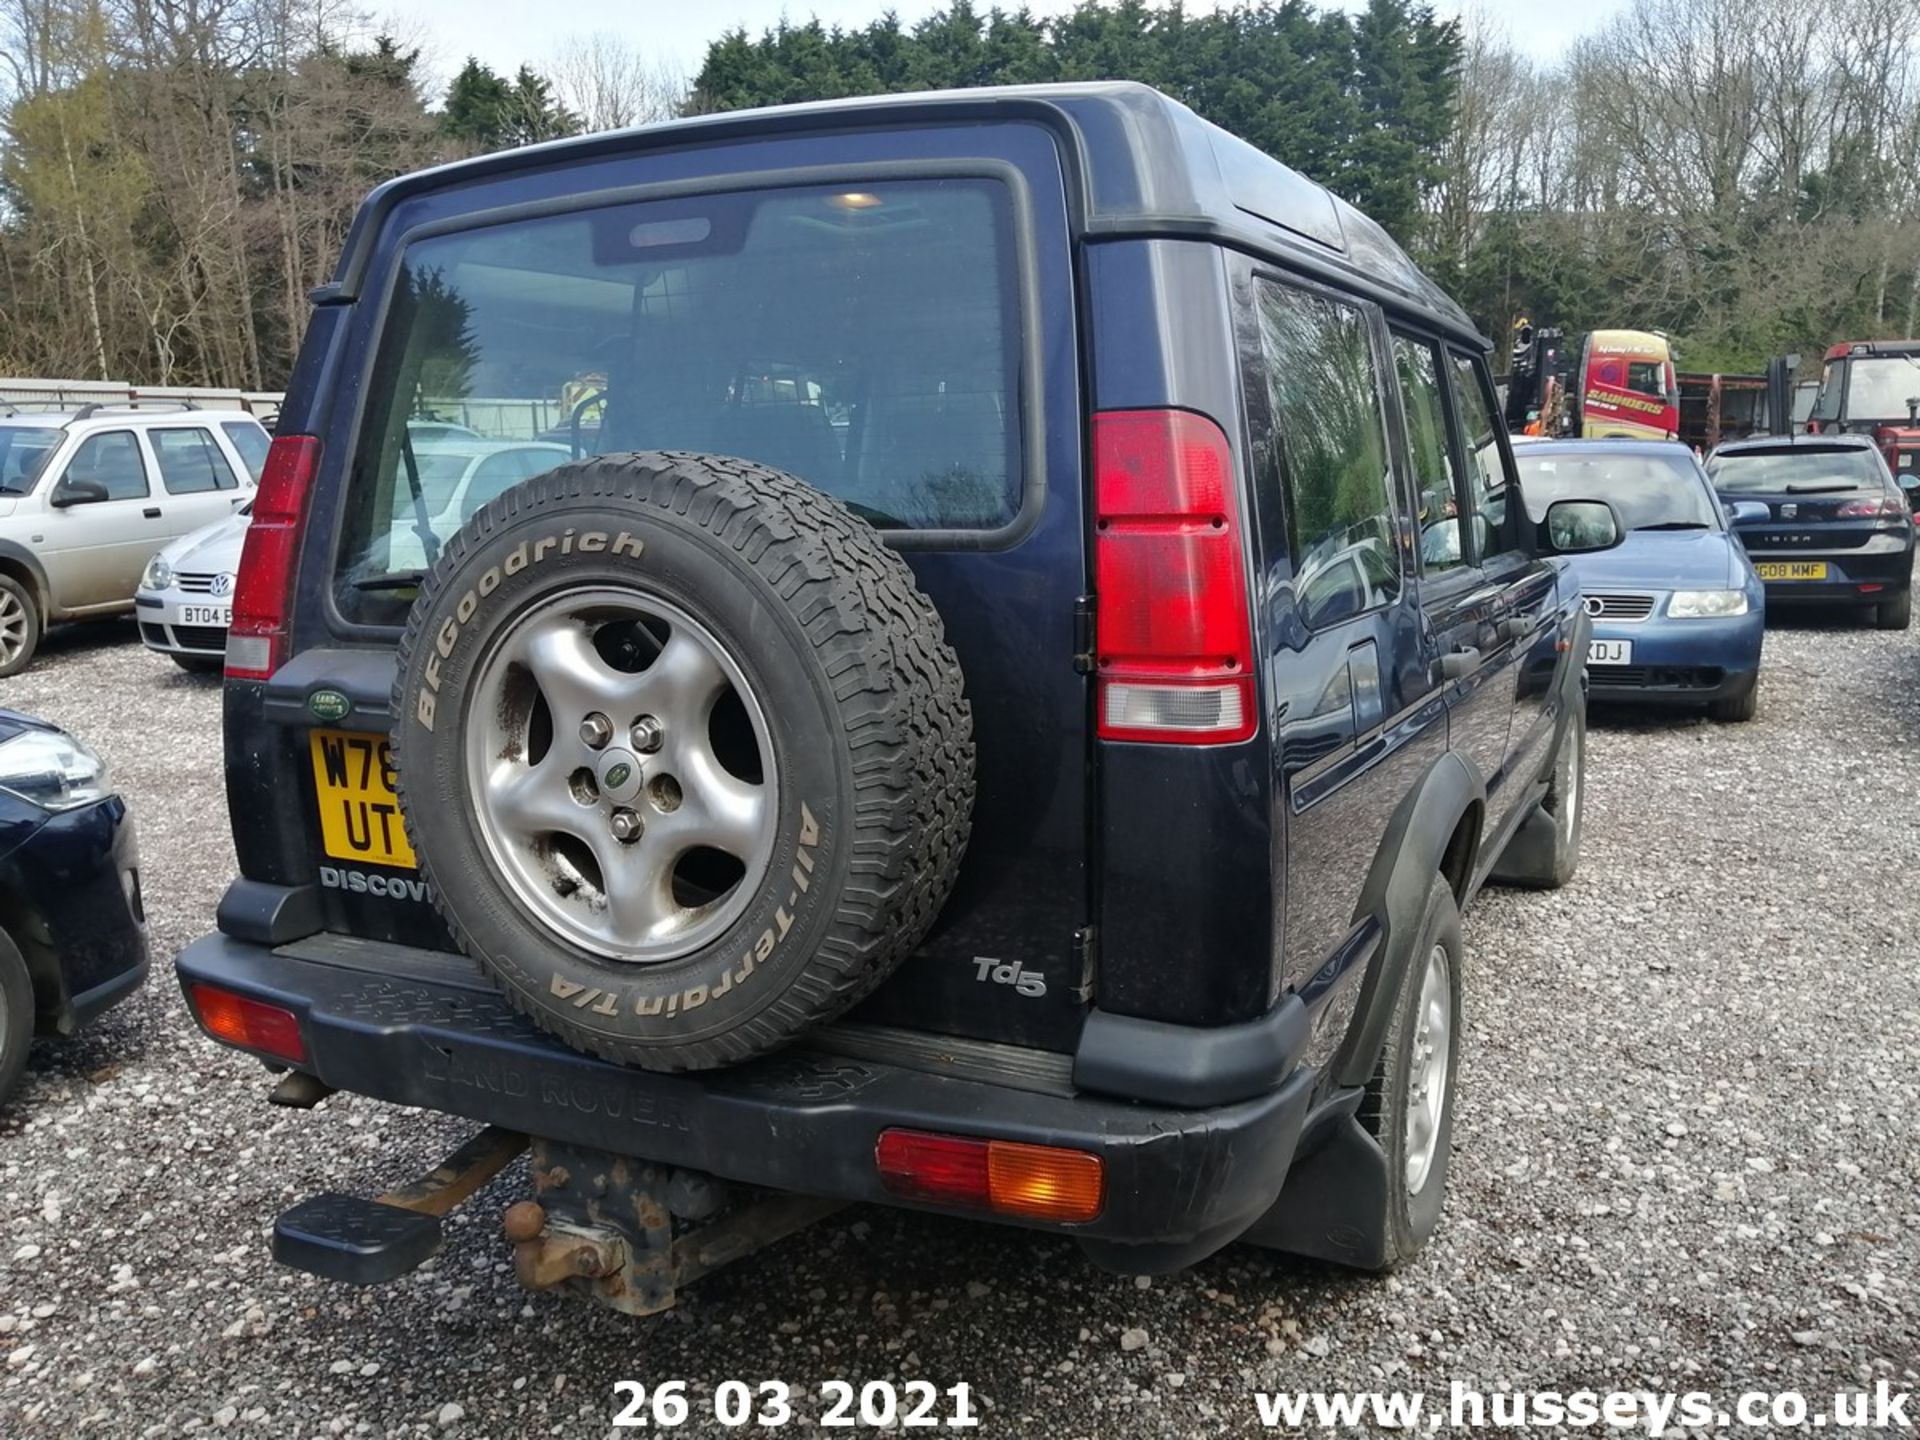 2000 LAND ROVER DISCOVERY - 2500cc 5dr Estate (Blue) - Image 13 of 23